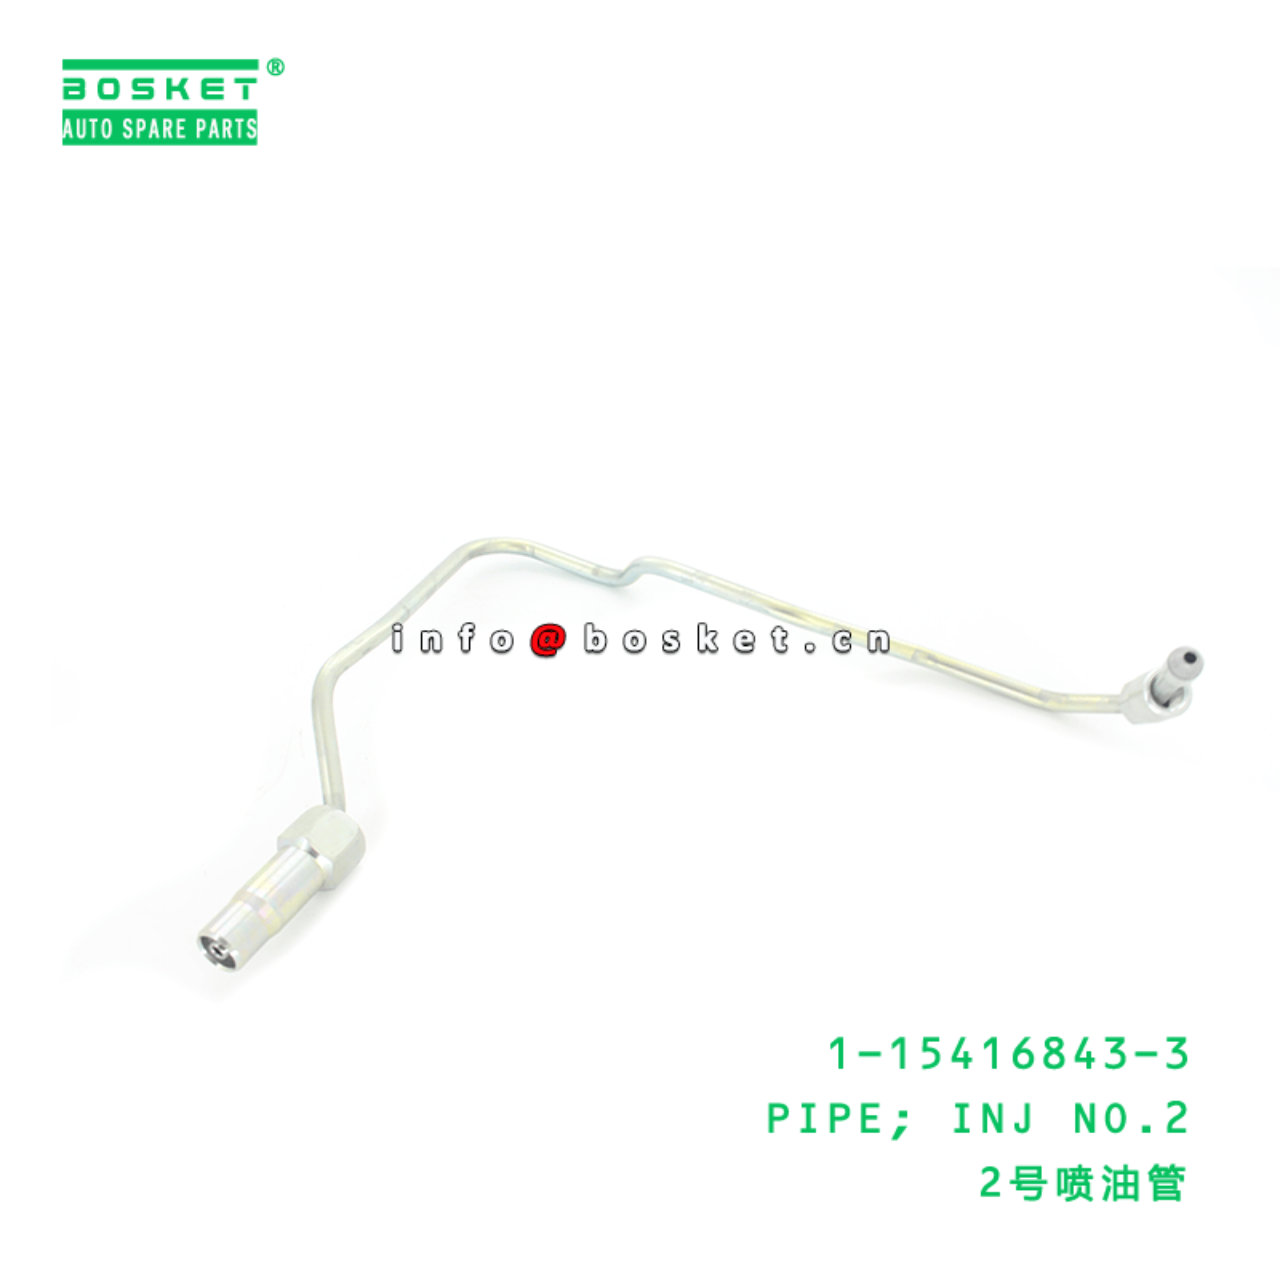 1-15416843-3 Injection No.2 Pipe 1154168433 Suitable for ISUZU CXZ 6WF1